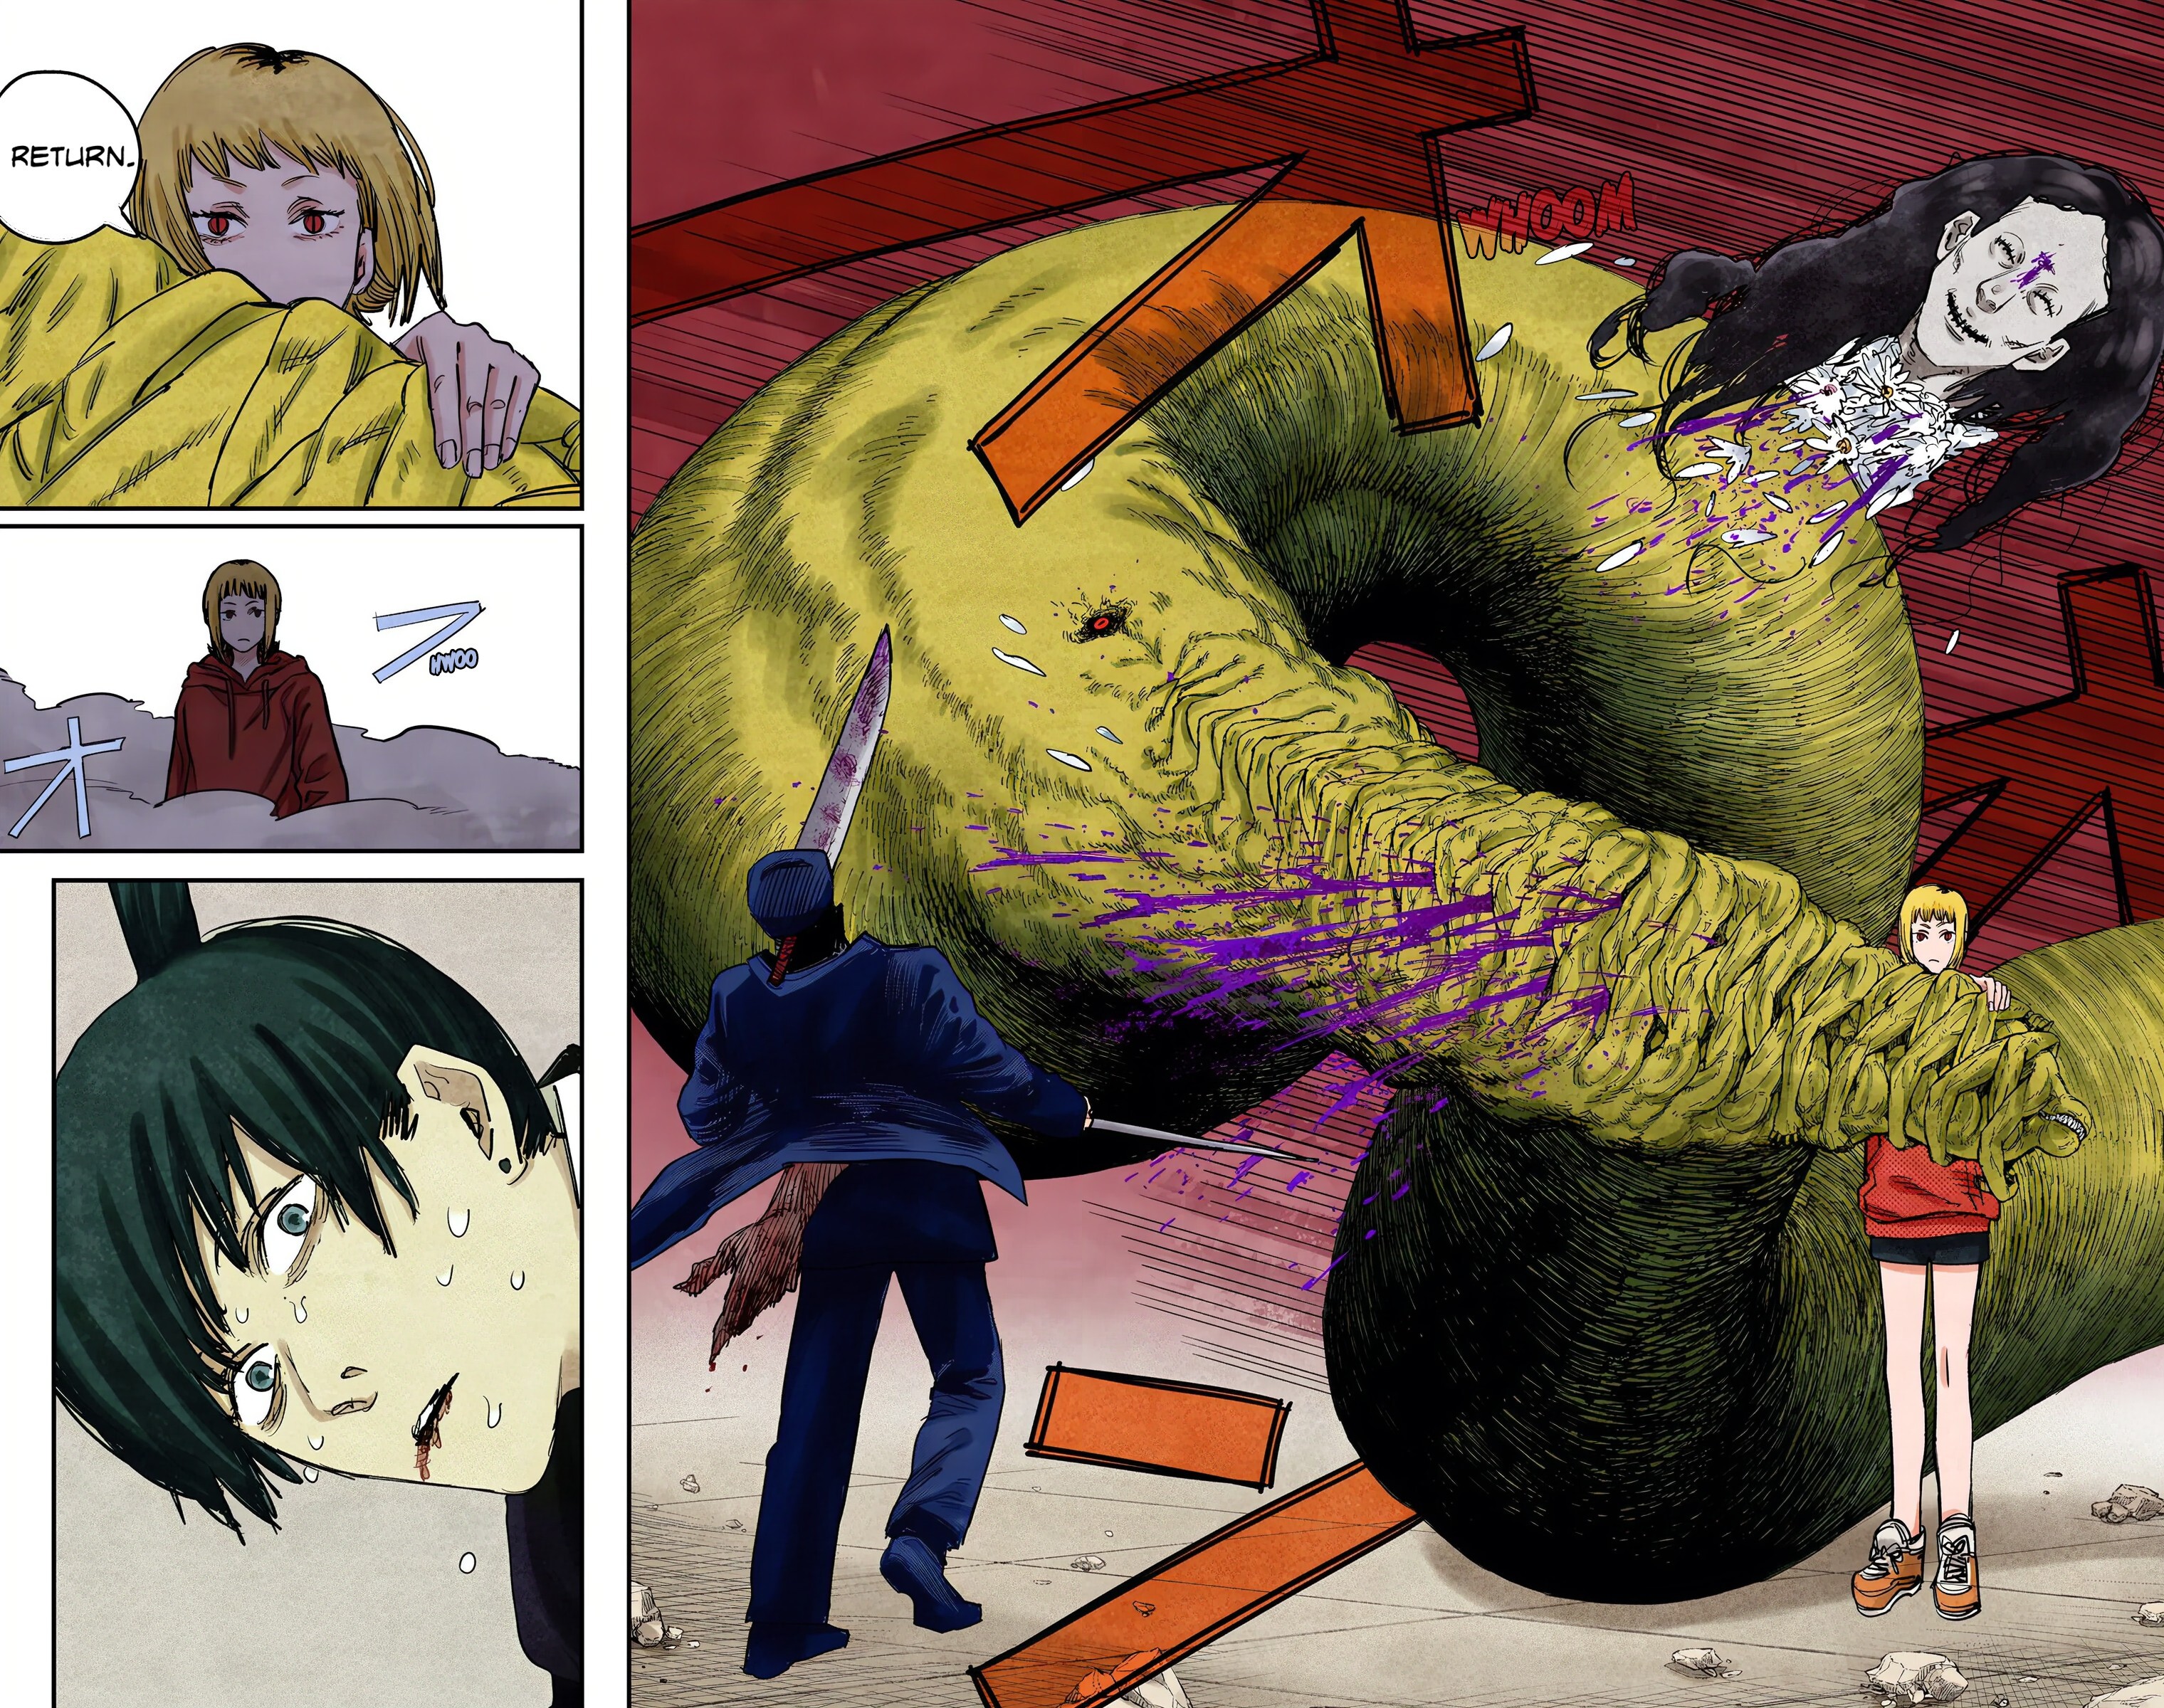 Chainsaw Man: The Curse Devil's Power Is Based on a Real Japanese Ritual